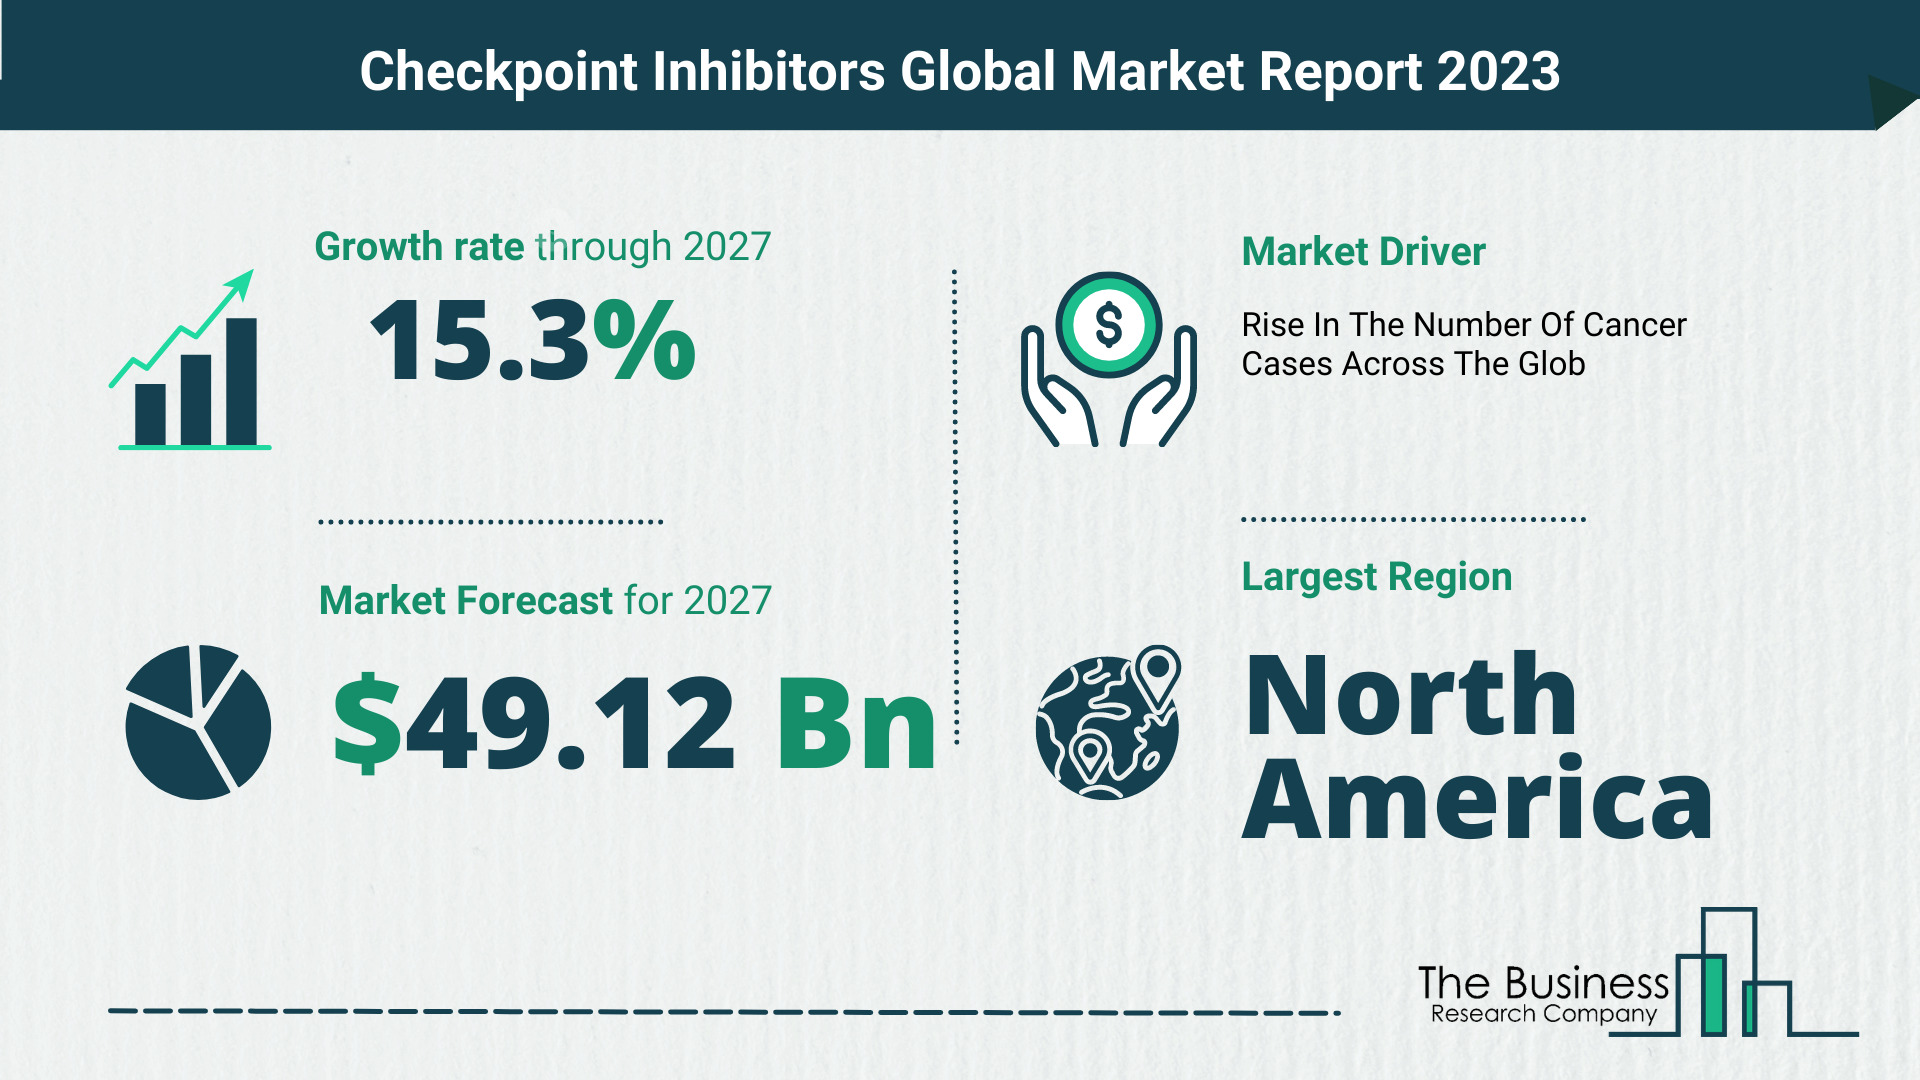 Checkpoint Inhibitors Market Overview: Market Size, Drivers And Trends